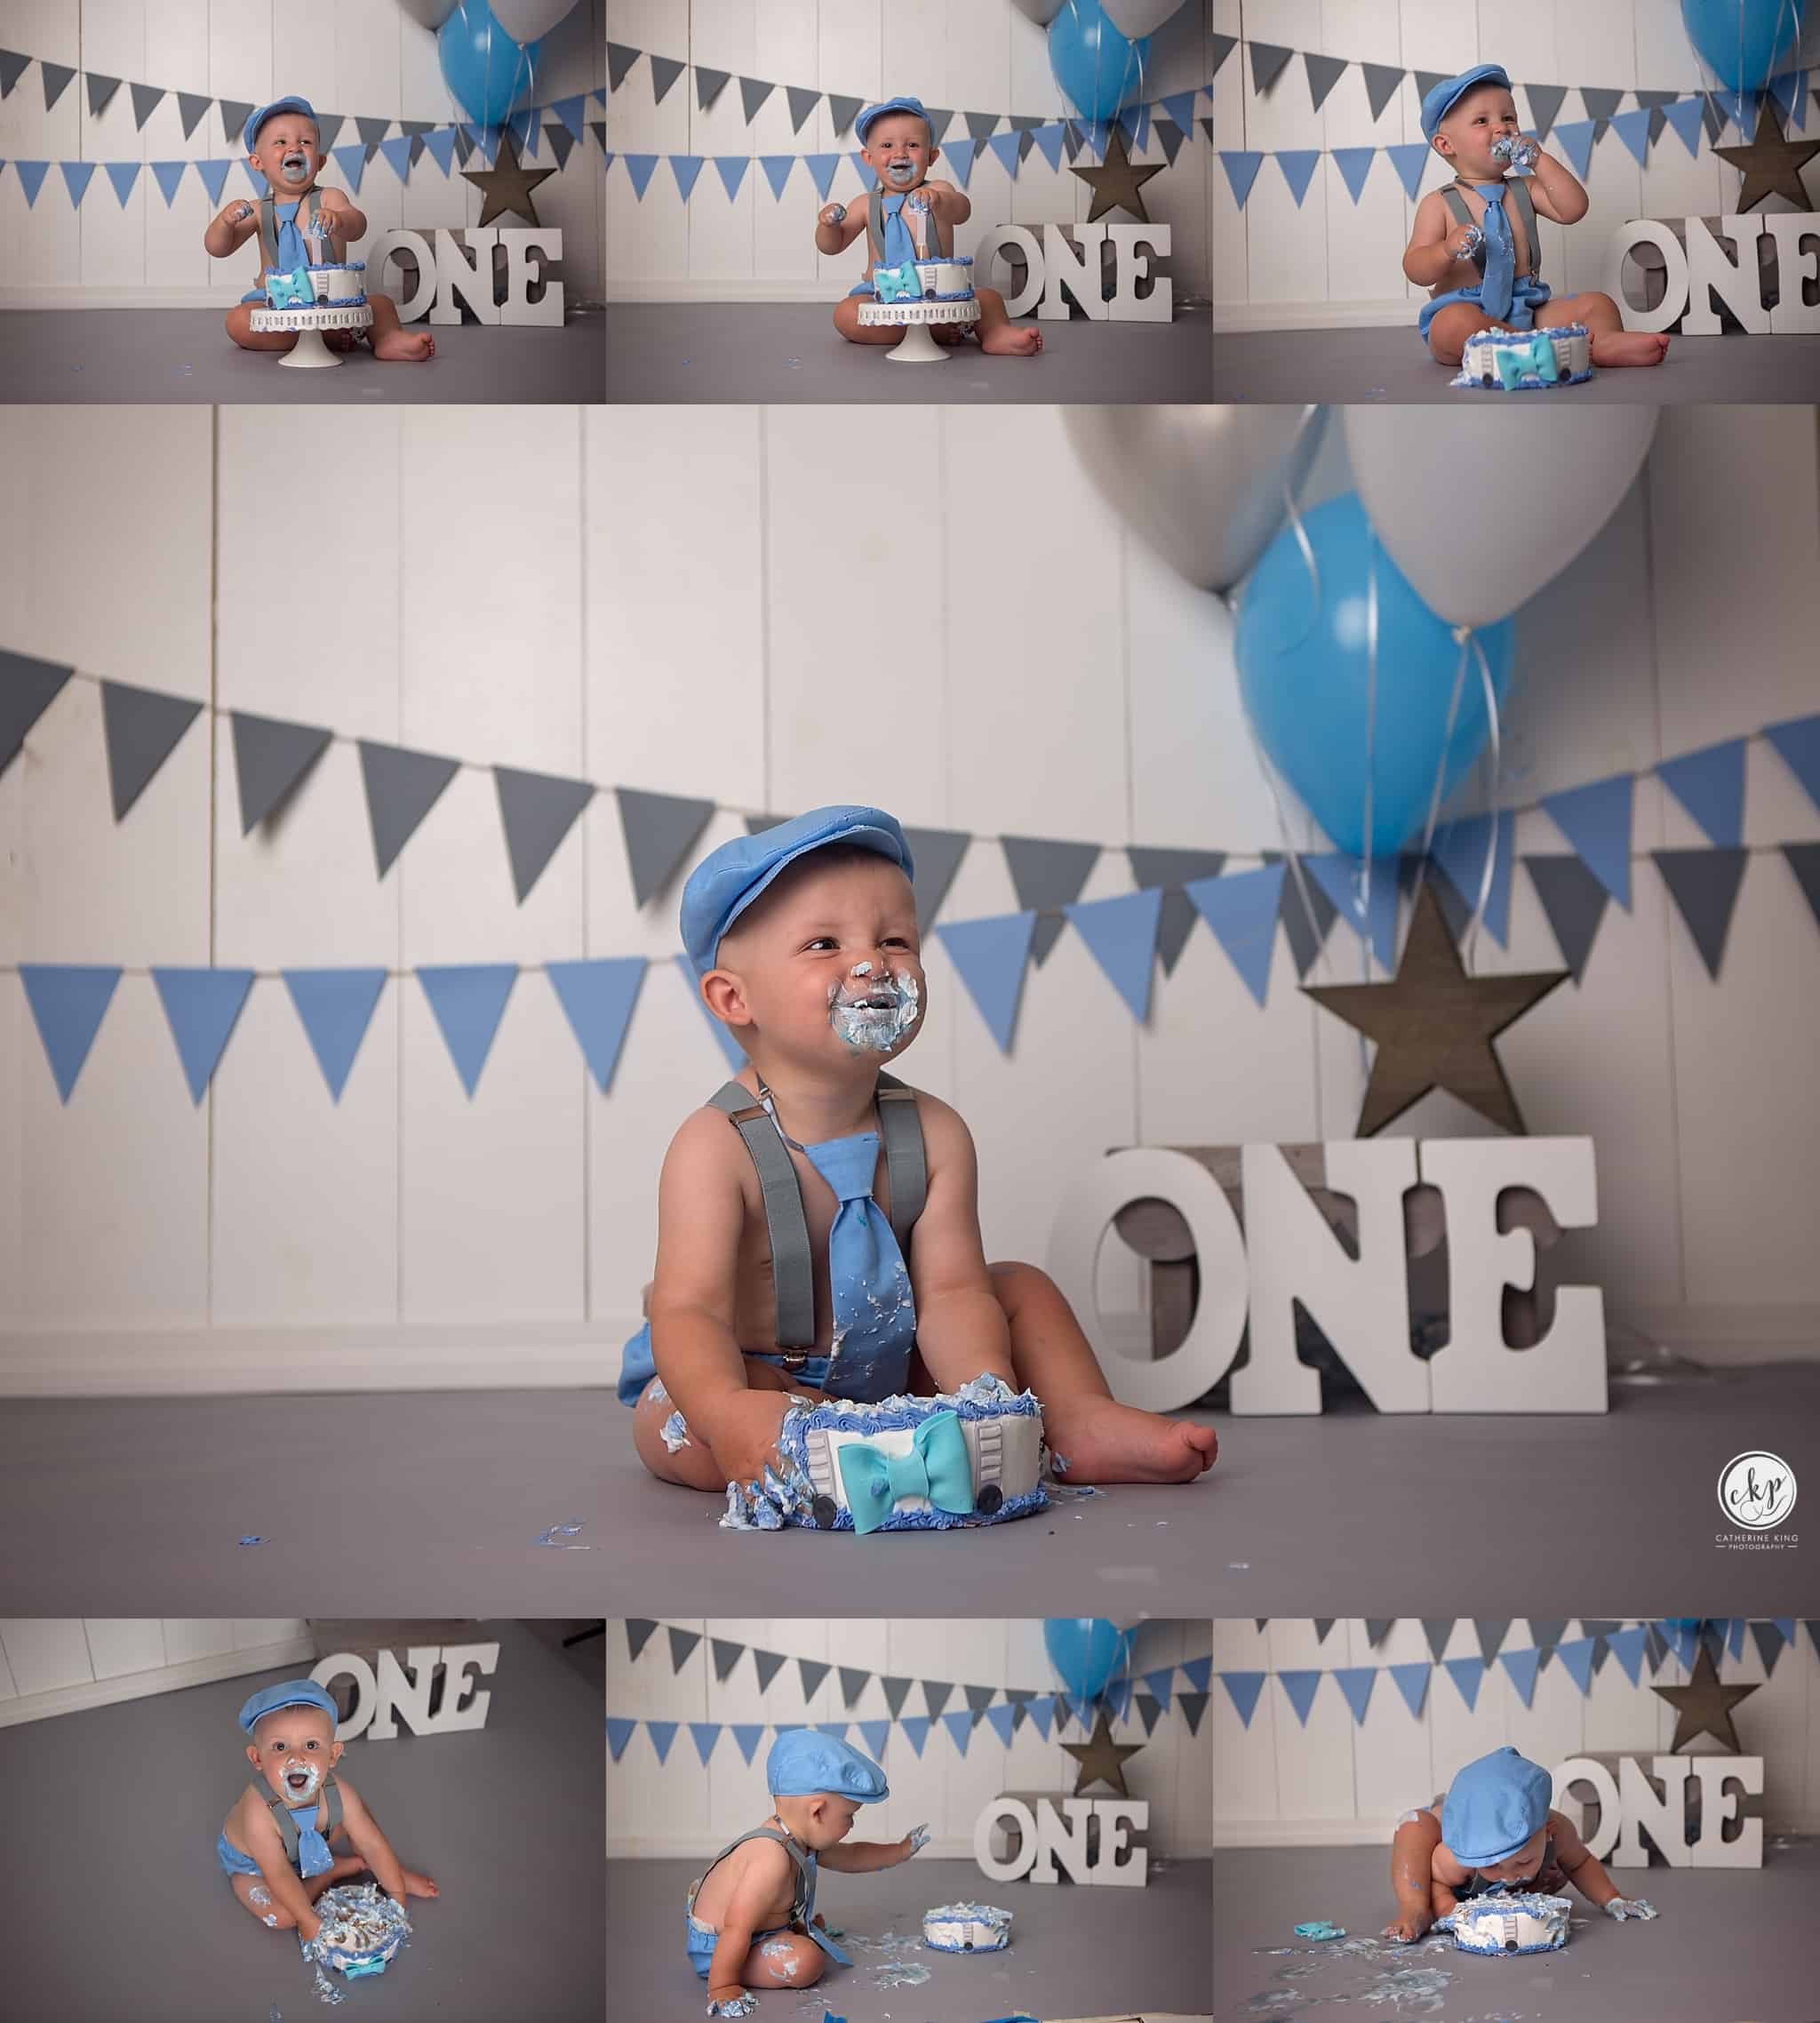 1 year birthday cake smash photography session with Brody